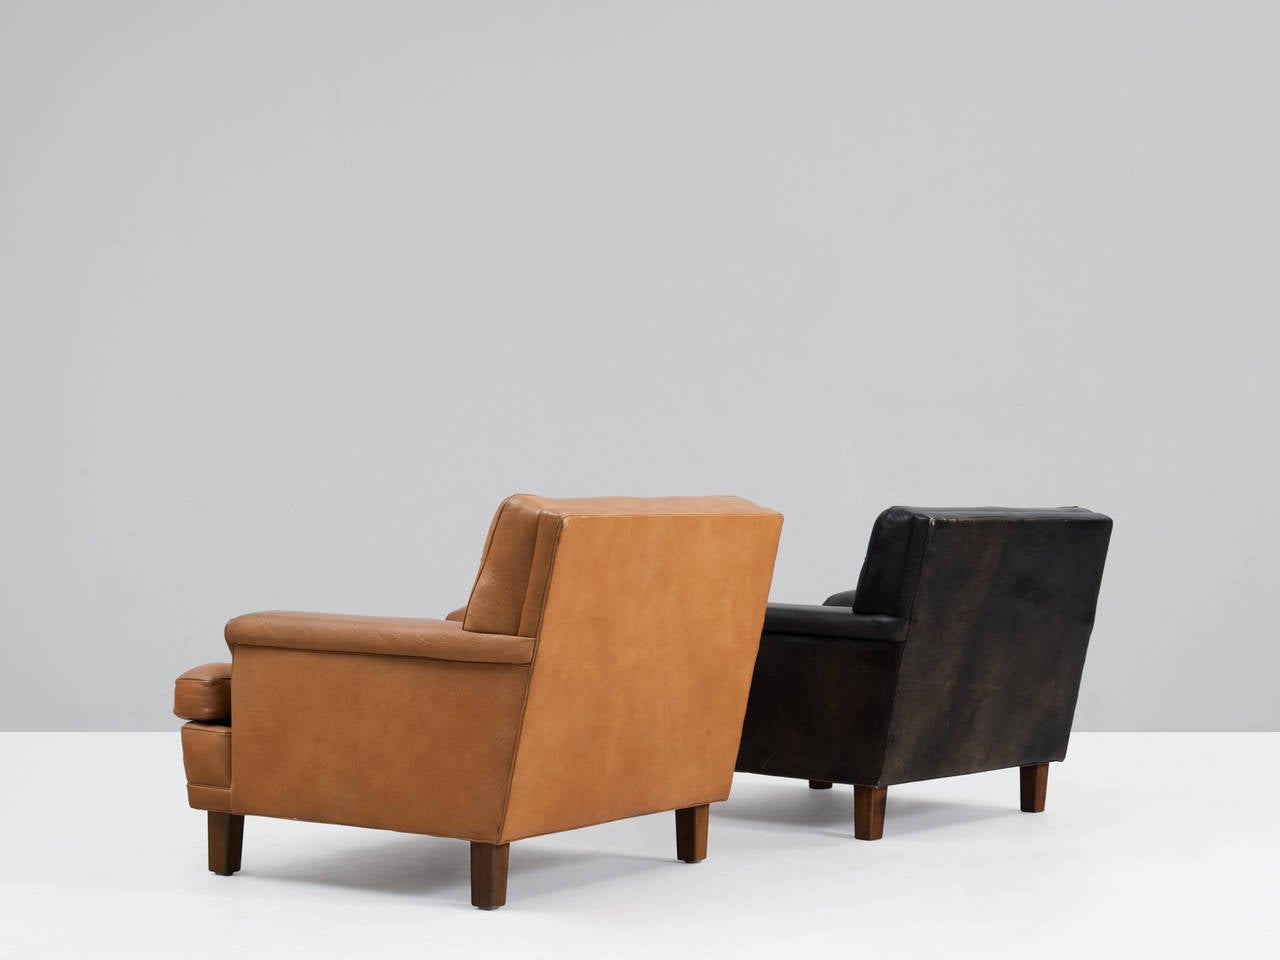 Pair of lounge chairs, in leather and wood, by Arne Norell, Sweden 1960s. 

Two lounge chairs designed by Arne Norell with wonderful shapes and comfort in cognac and black leather. The tufted leather cushions give these chairs an interesting